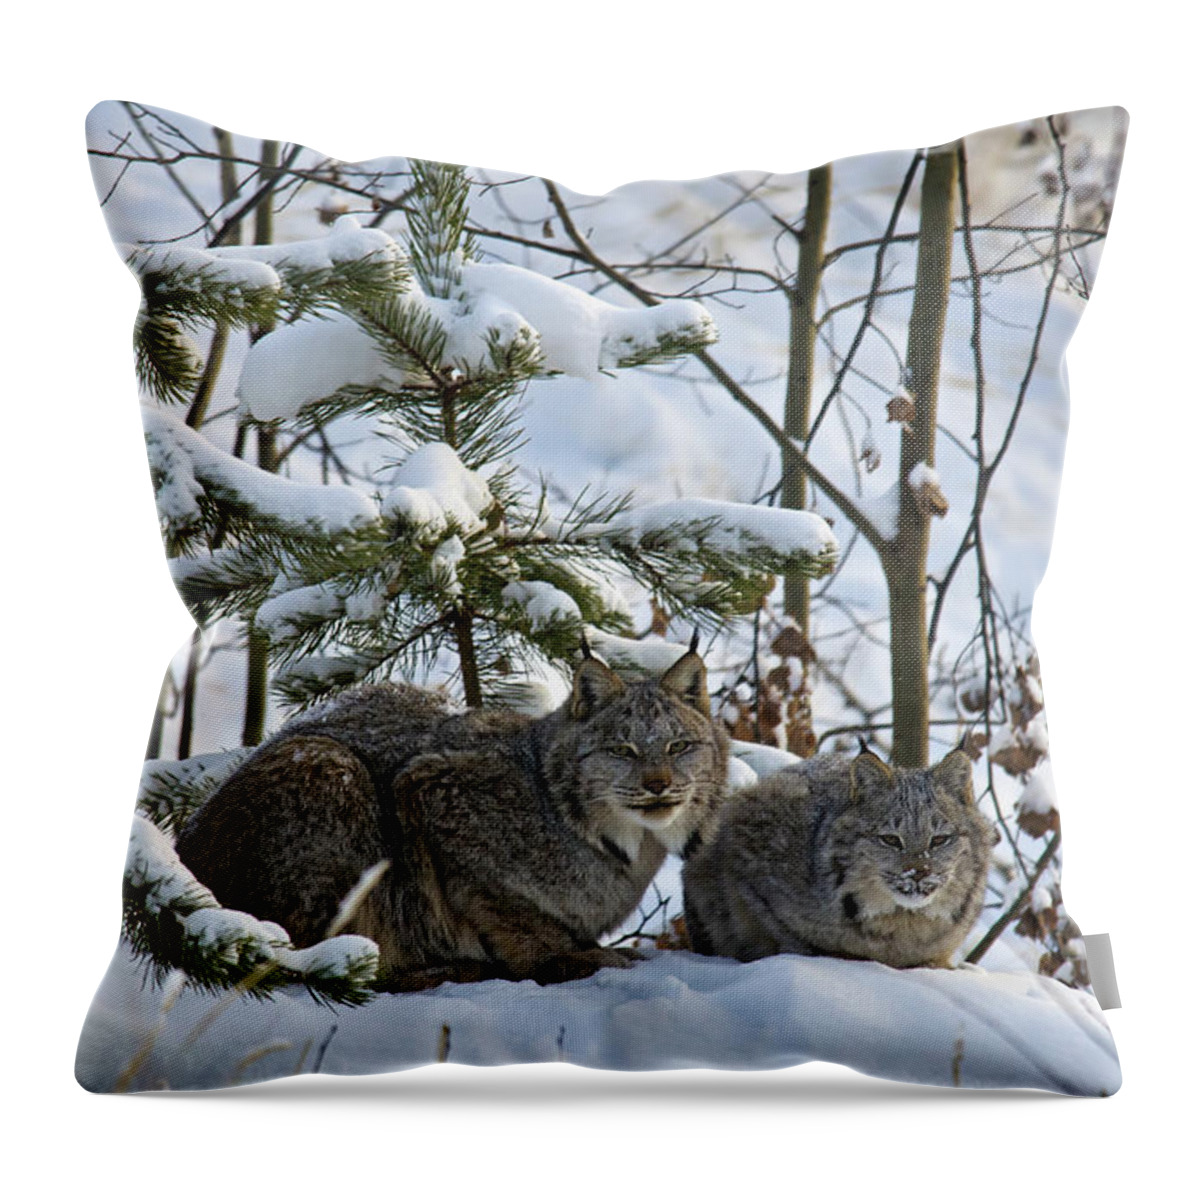 Three Quarter Length Throw Pillow featuring the photograph Canada Lynx Lynx Canadensis Mother And by Mark Newman / Design Pics